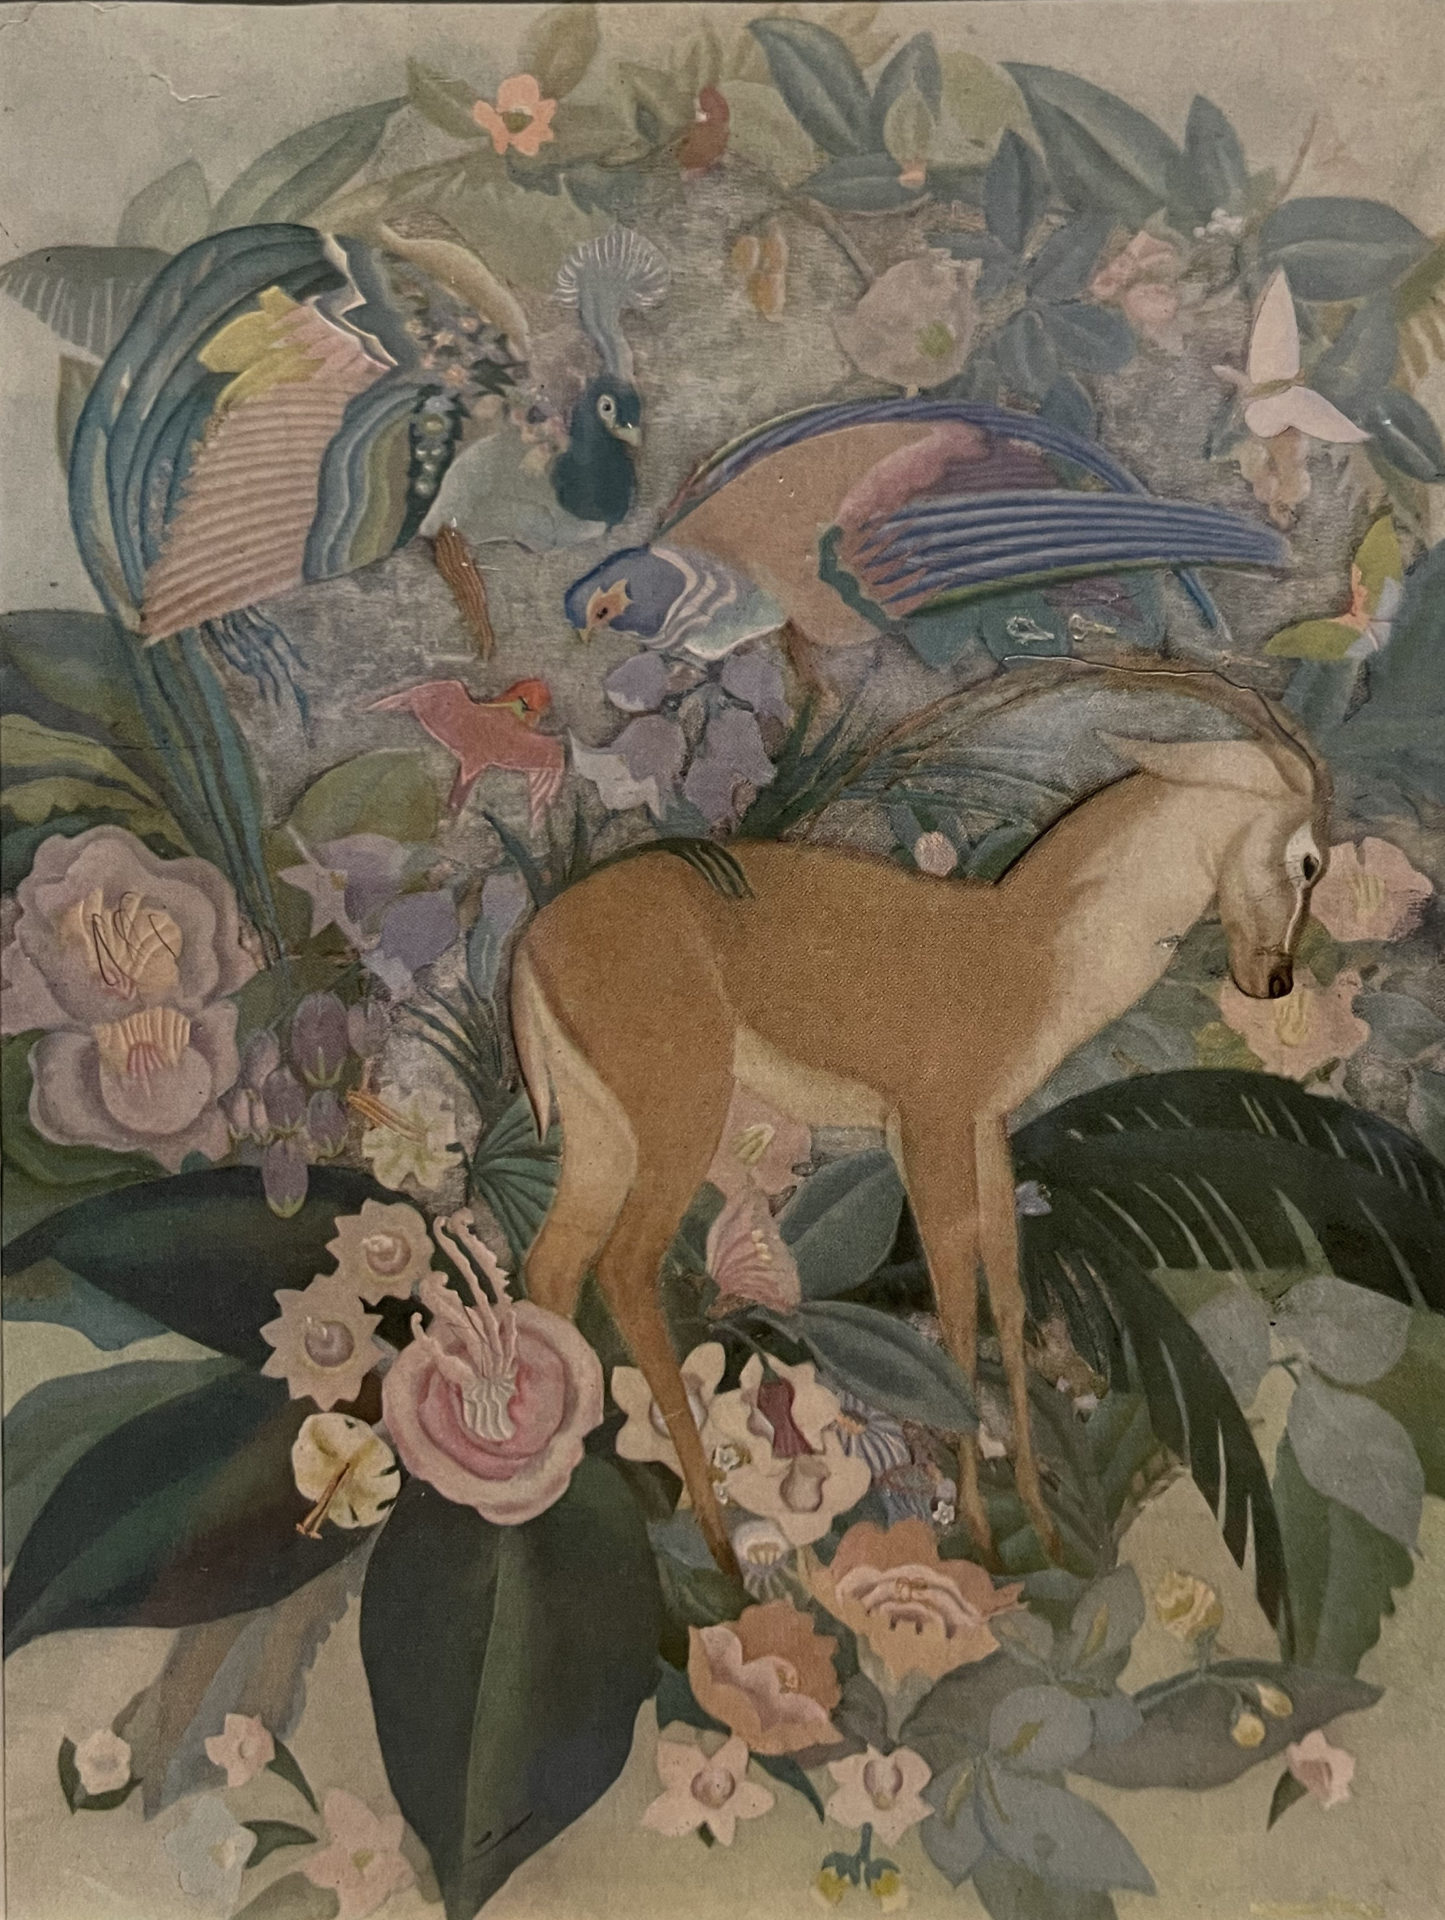 A painting of an antelope in a rich forest of creatures and flowers appears among Hilary the works of artists who inspired him, including his mother, the artist Katherine Sturges. Press image courtesy of the Norman Rockwell Museum